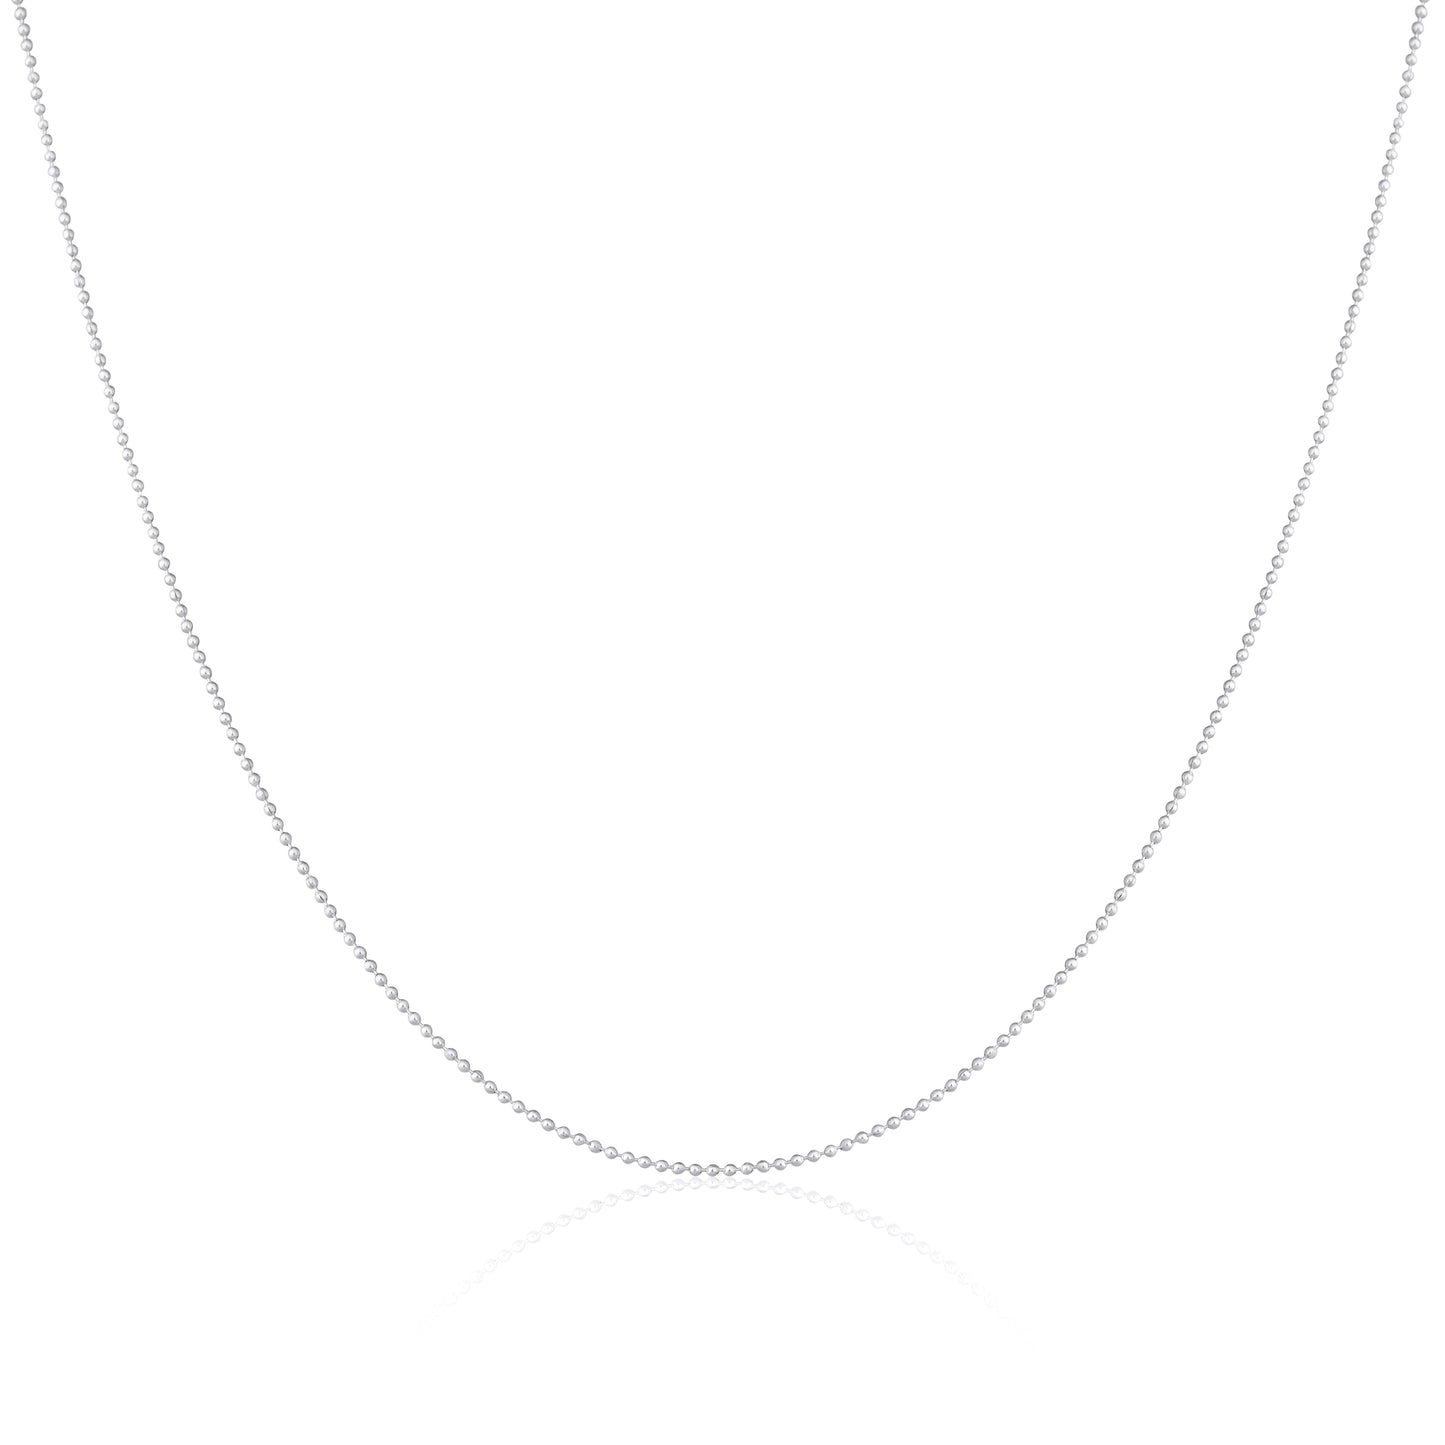 Sterling Silver 1mm Bead Chain Choker 12 + 3 Inches